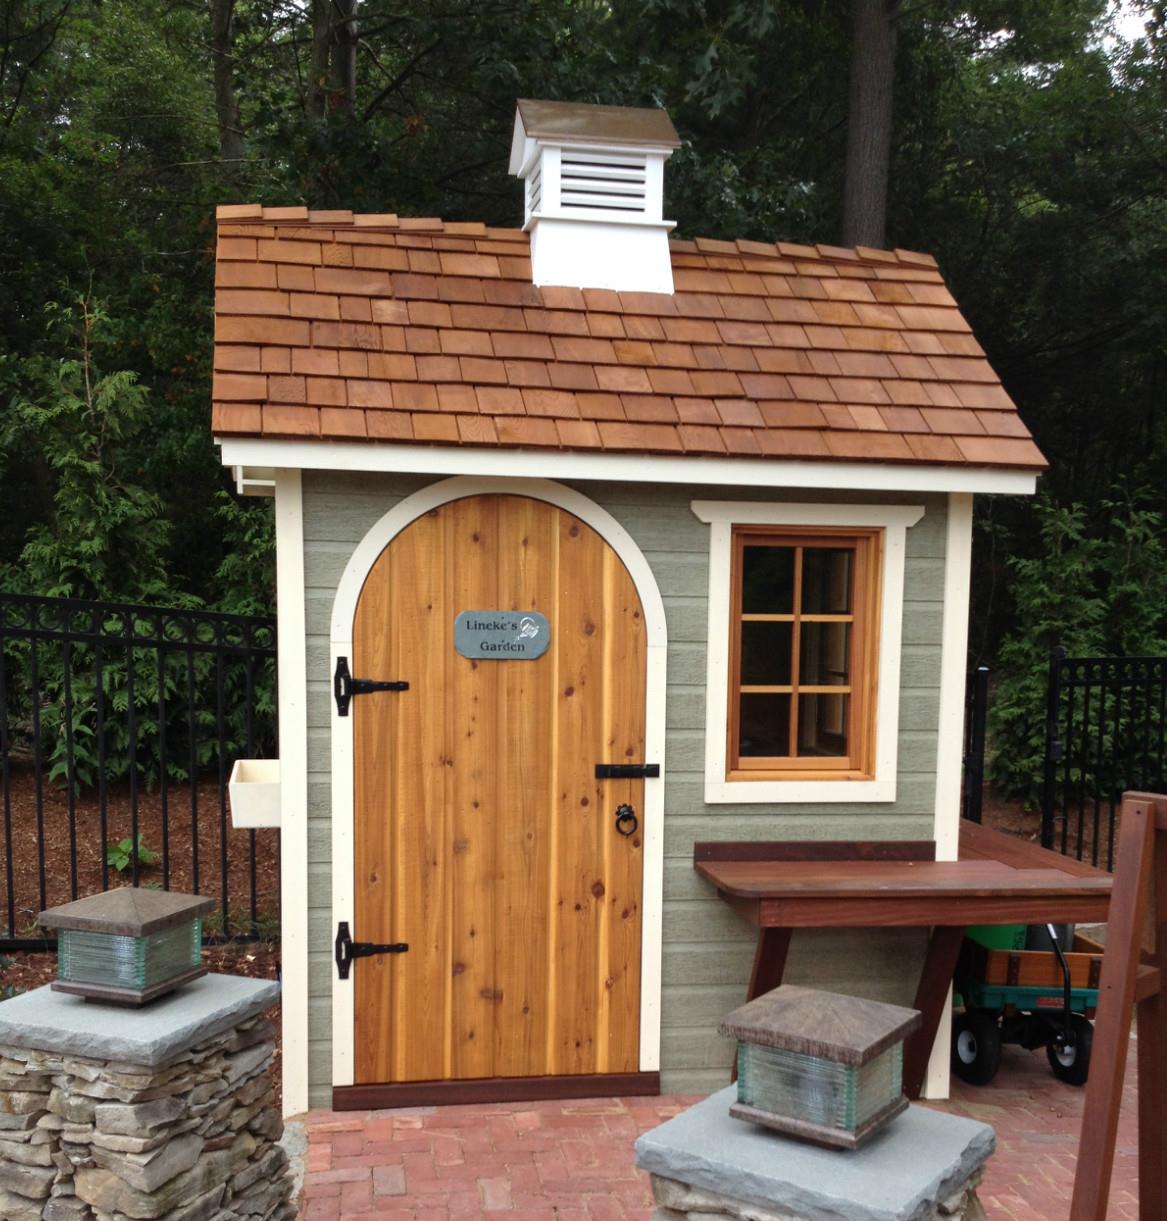 Palmerston shed 5x7 with cedar shingles in Hanover Massachusetts. ID number 167927-1.